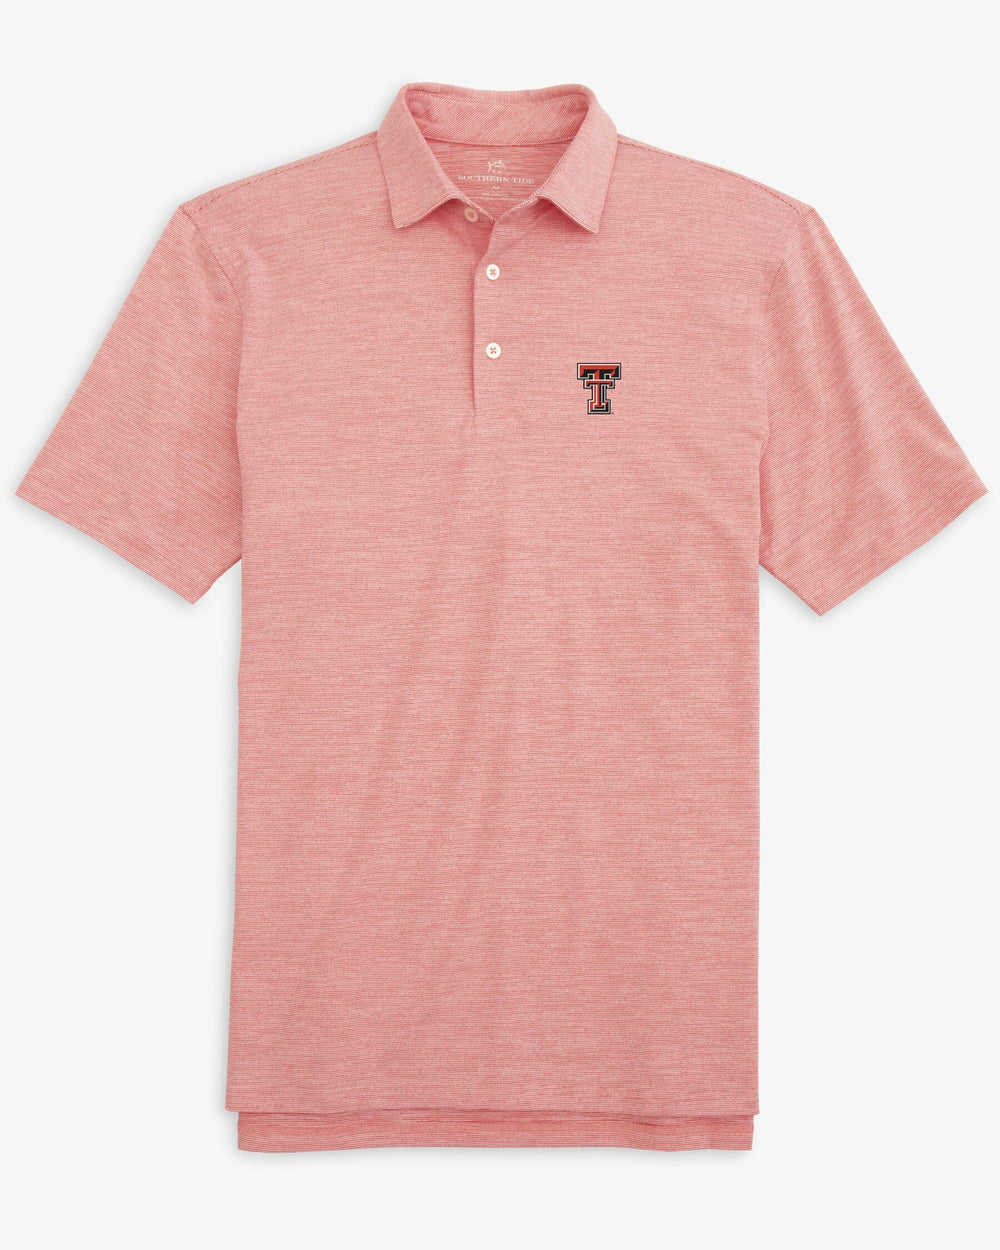 The front view of the Texas Tech Driver Spacedye Polo Shirt by Southern Tide - Varsity Red